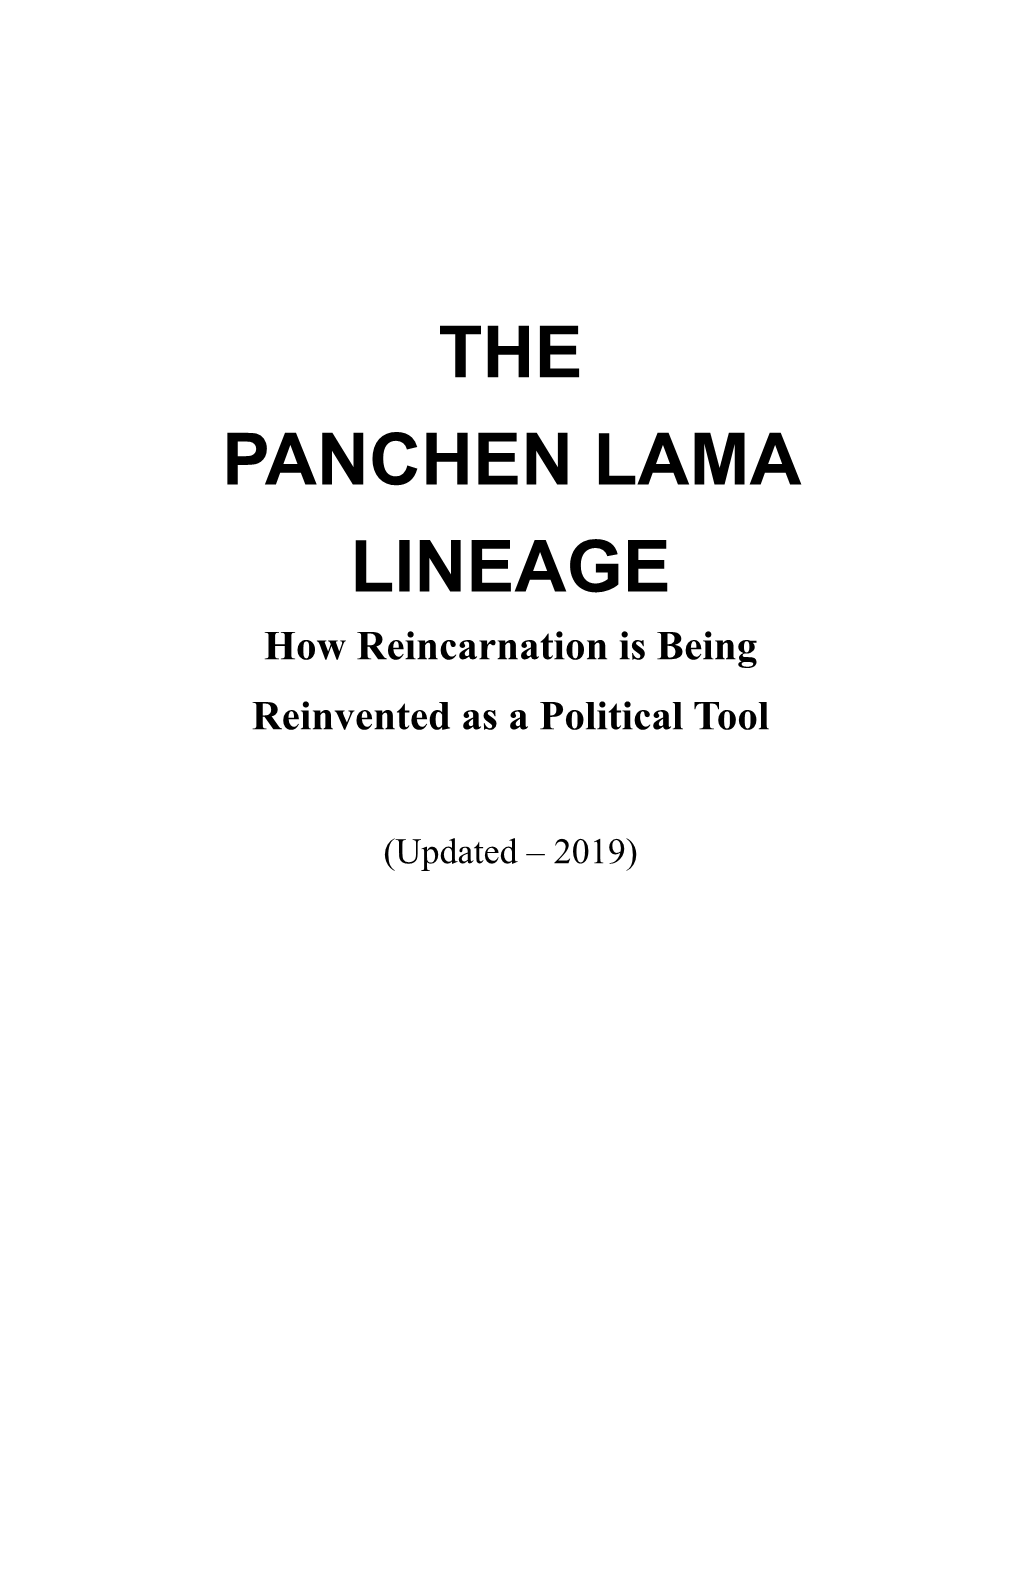 THE PANCHEN LAMA LINEAGE How Reincarnation Is Being Reinvented As a Political Tool